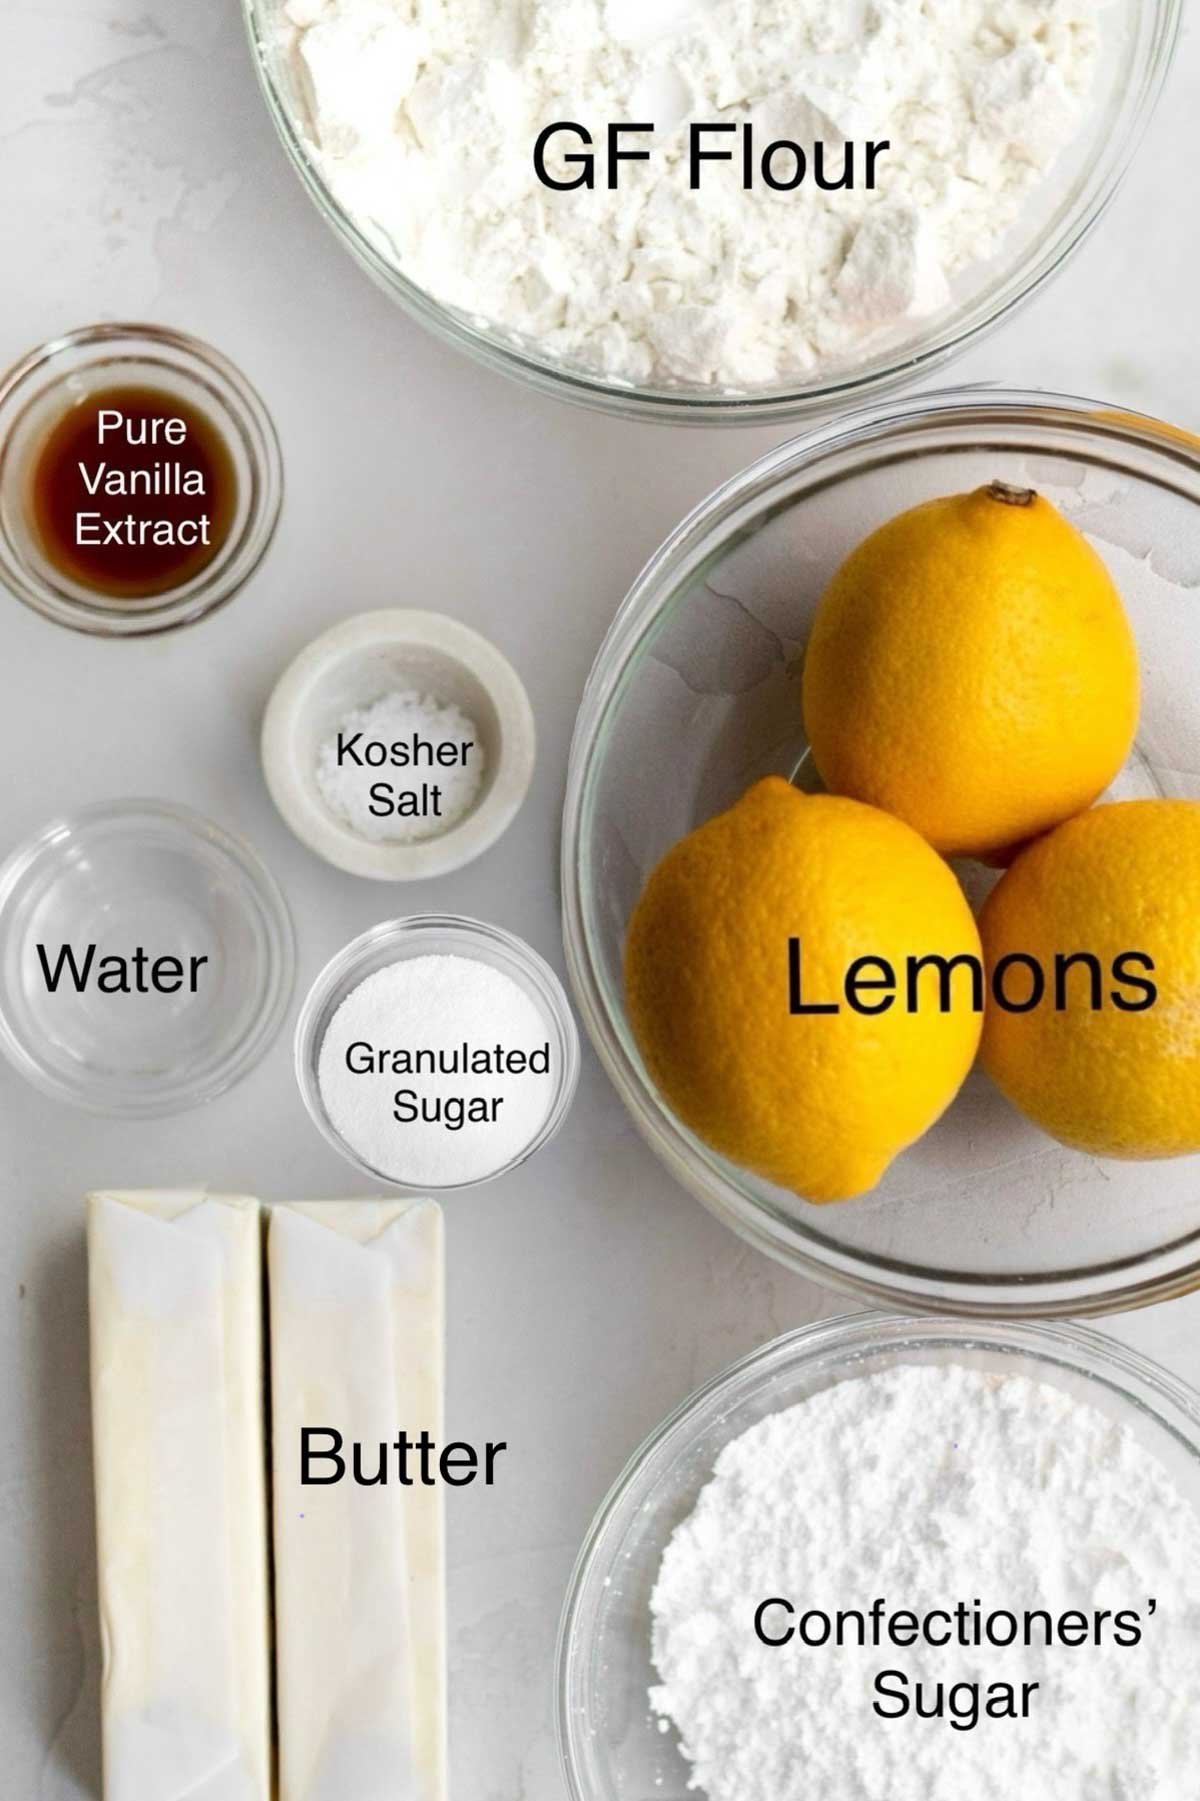 Gluten free flour, pure vanilla extract, kosher salt, lemons, water, granulated sugar, butter and confectioners' sugar in separate containers.